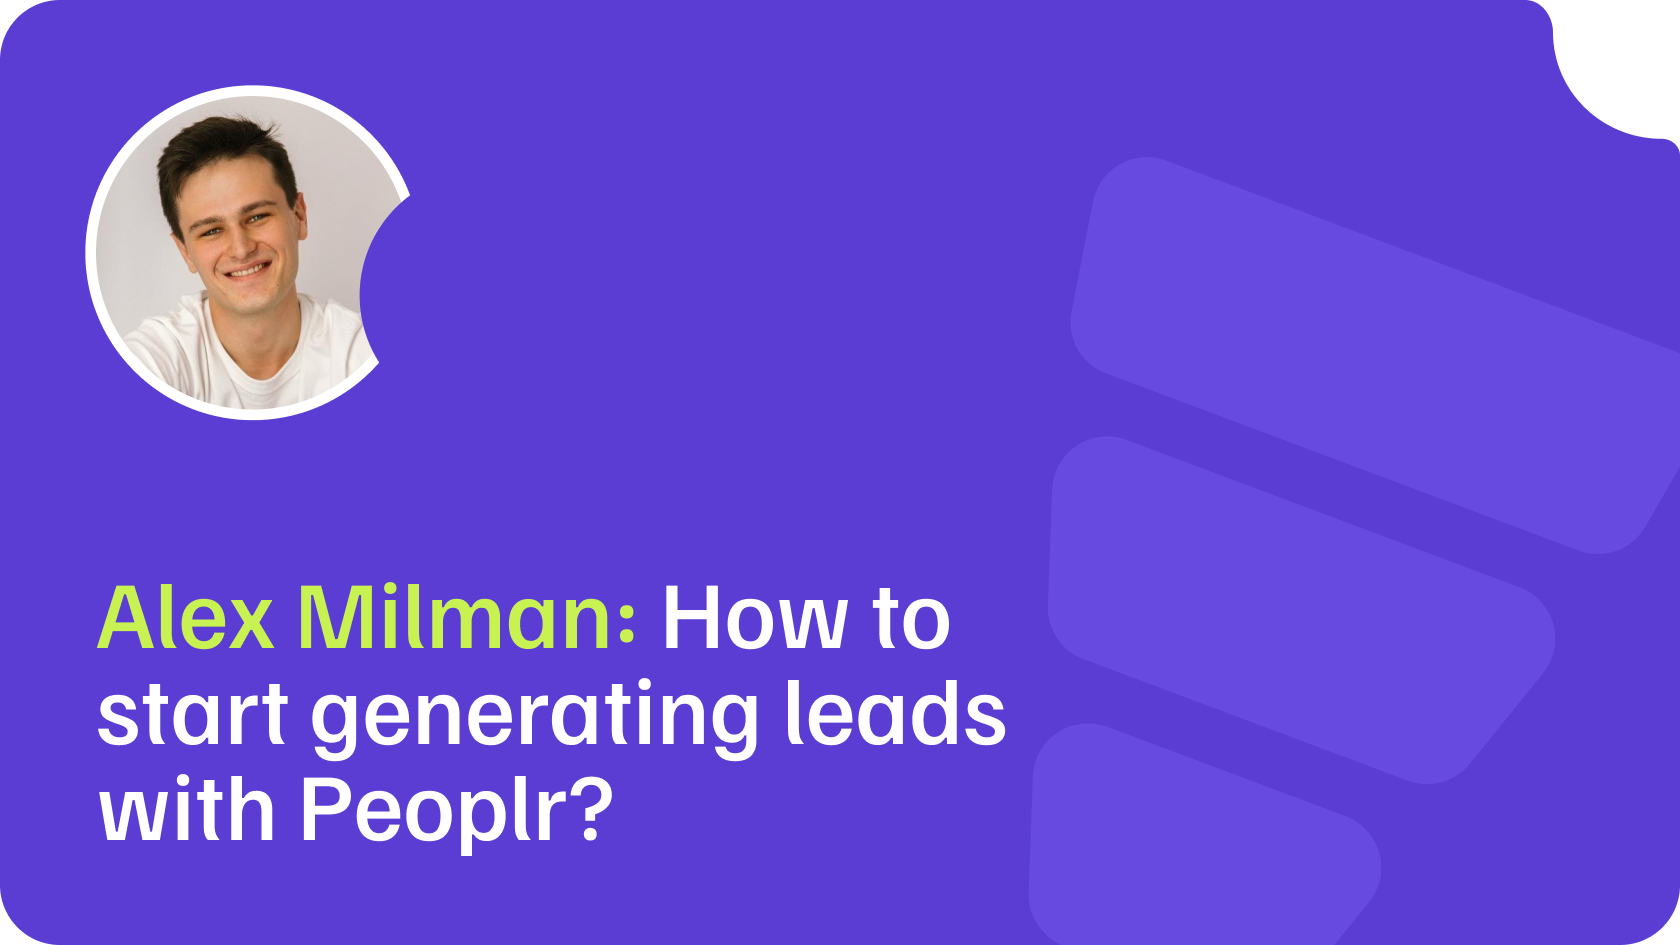 Alex Milman: How to start generating leads with Peoplr?